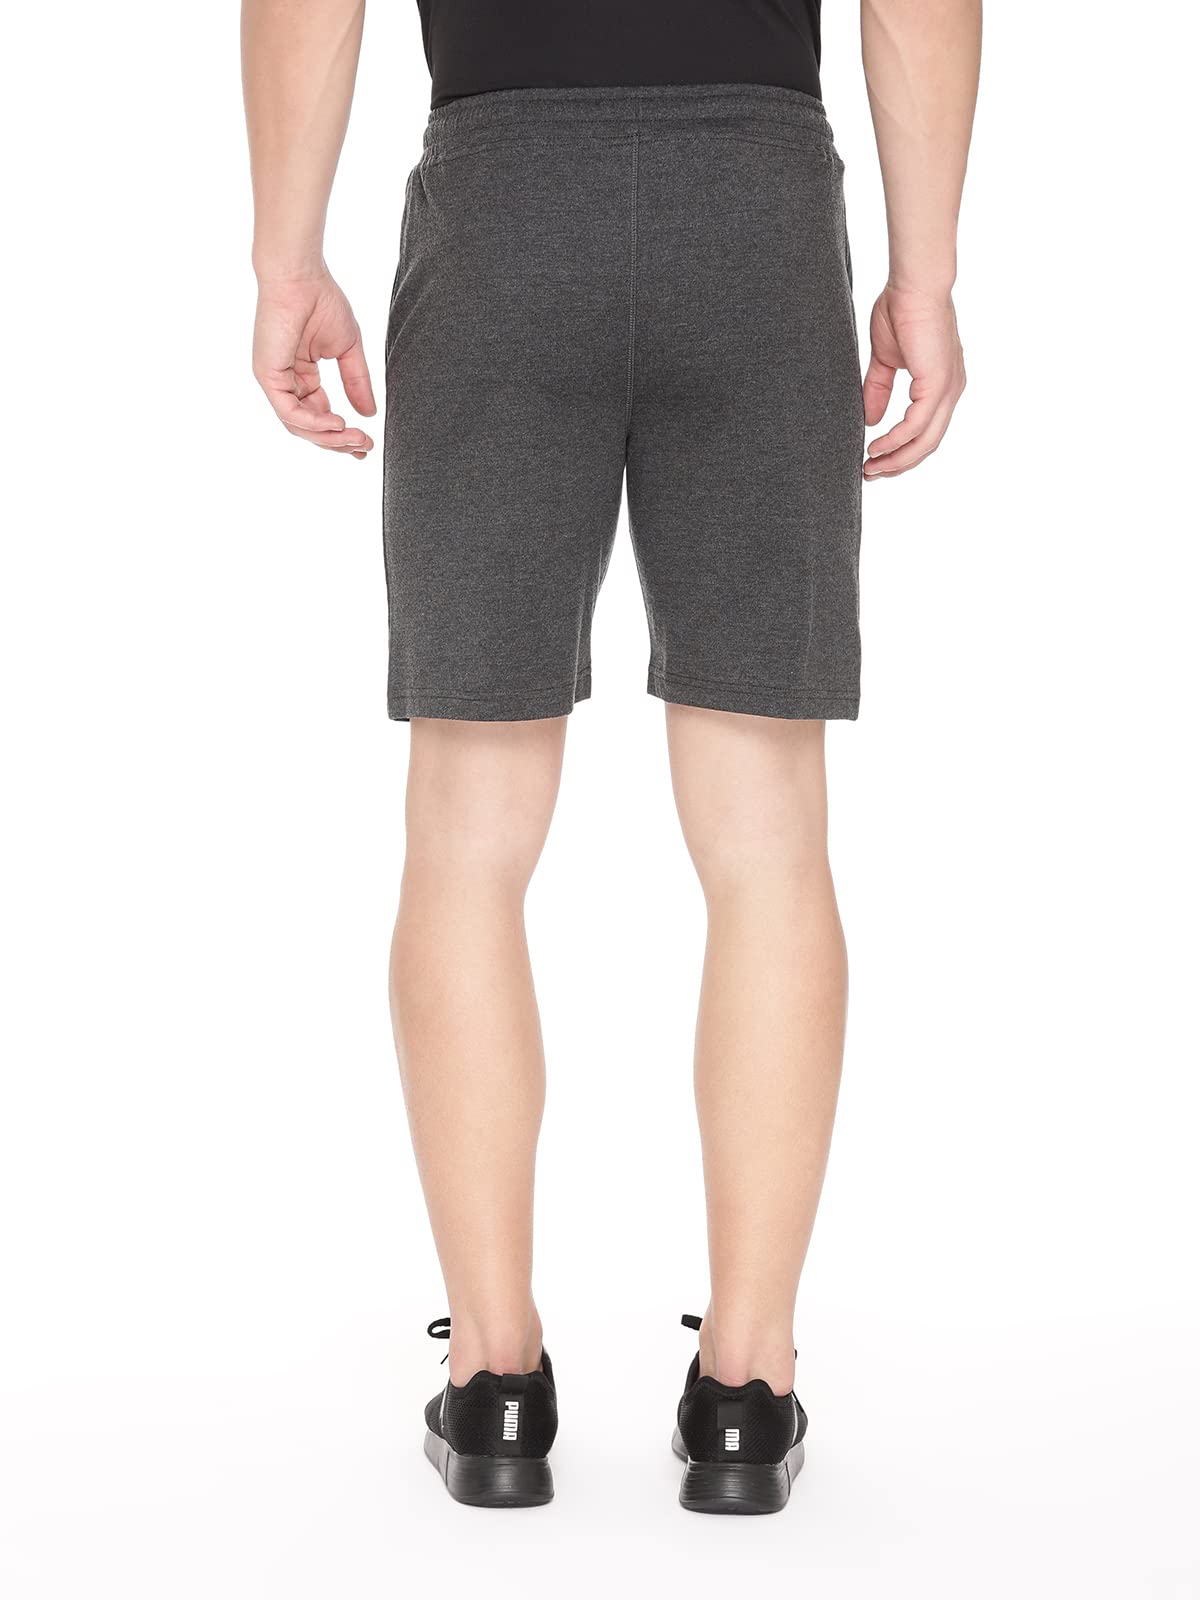 Pepe Jeans Athleisure Men Knit Cotton Stretch Shorts | Breathable Cotton Jersey, Gym and Casual Wear | with Drawstring and Zip Pocket in Black Melange - M